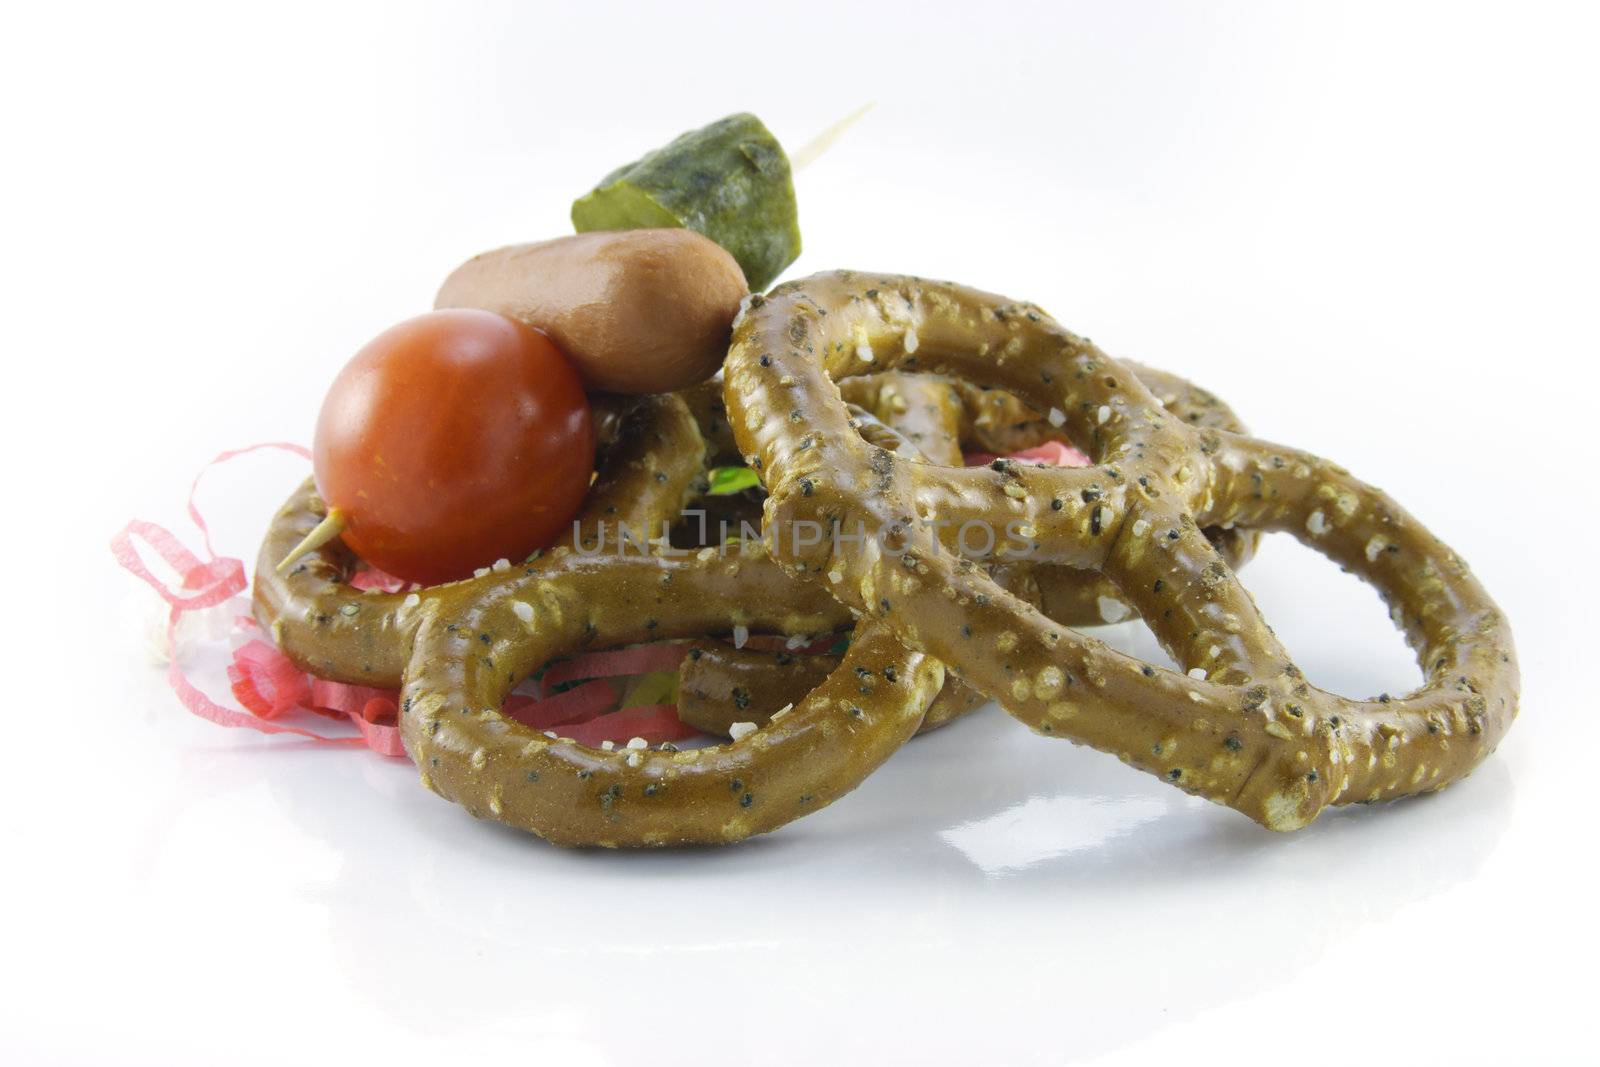 Pile of salty baked pretzels with cocktail stick containing hot dog, tomato and gherkin with streamers on a reflective white background